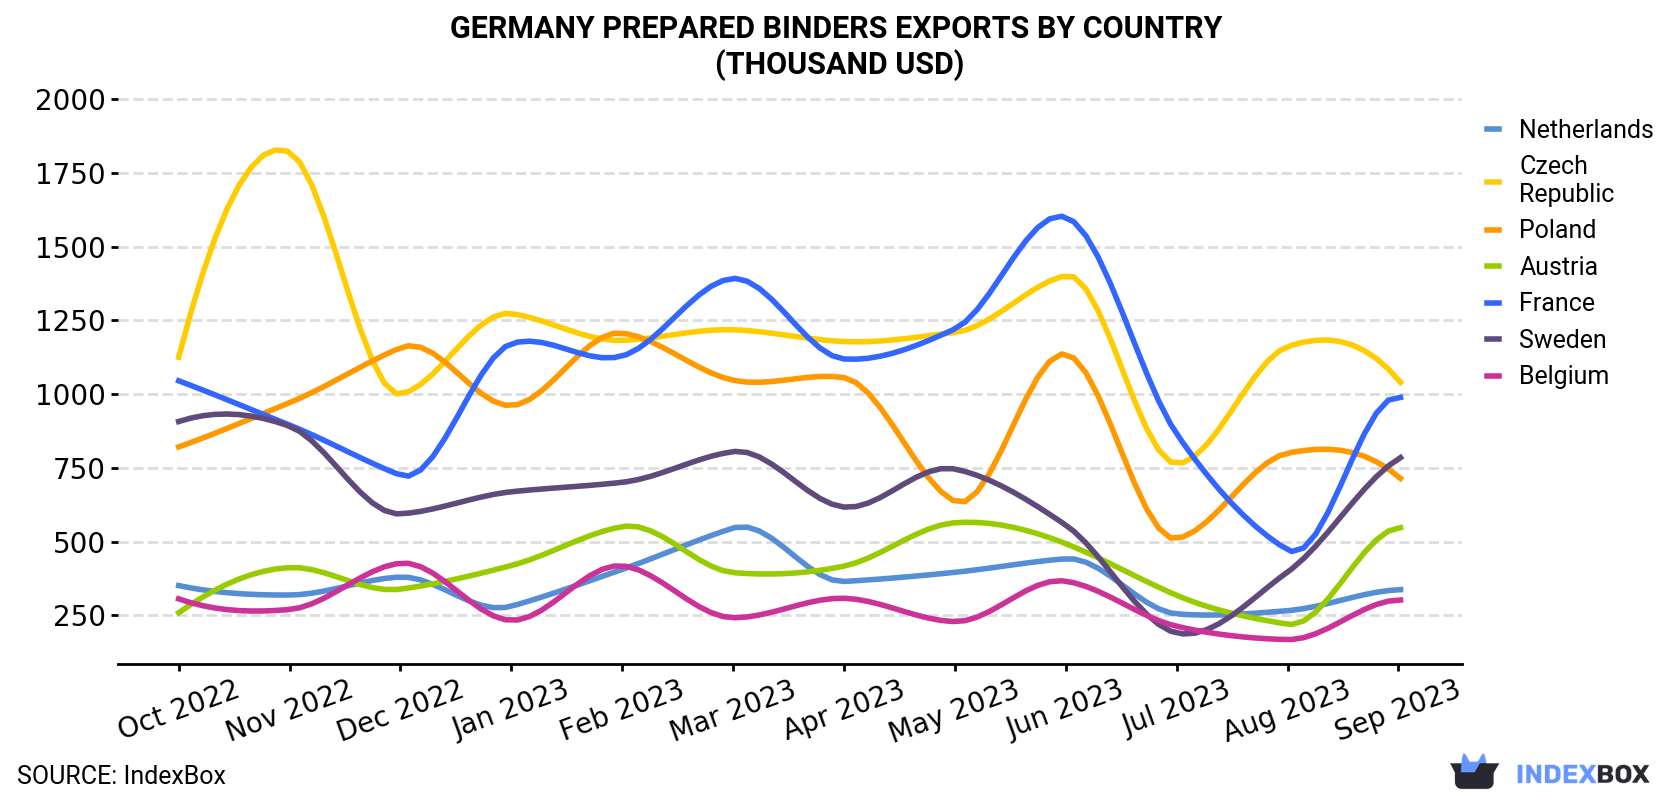 Germany Prepared Binders Exports By Country (Thousand USD)